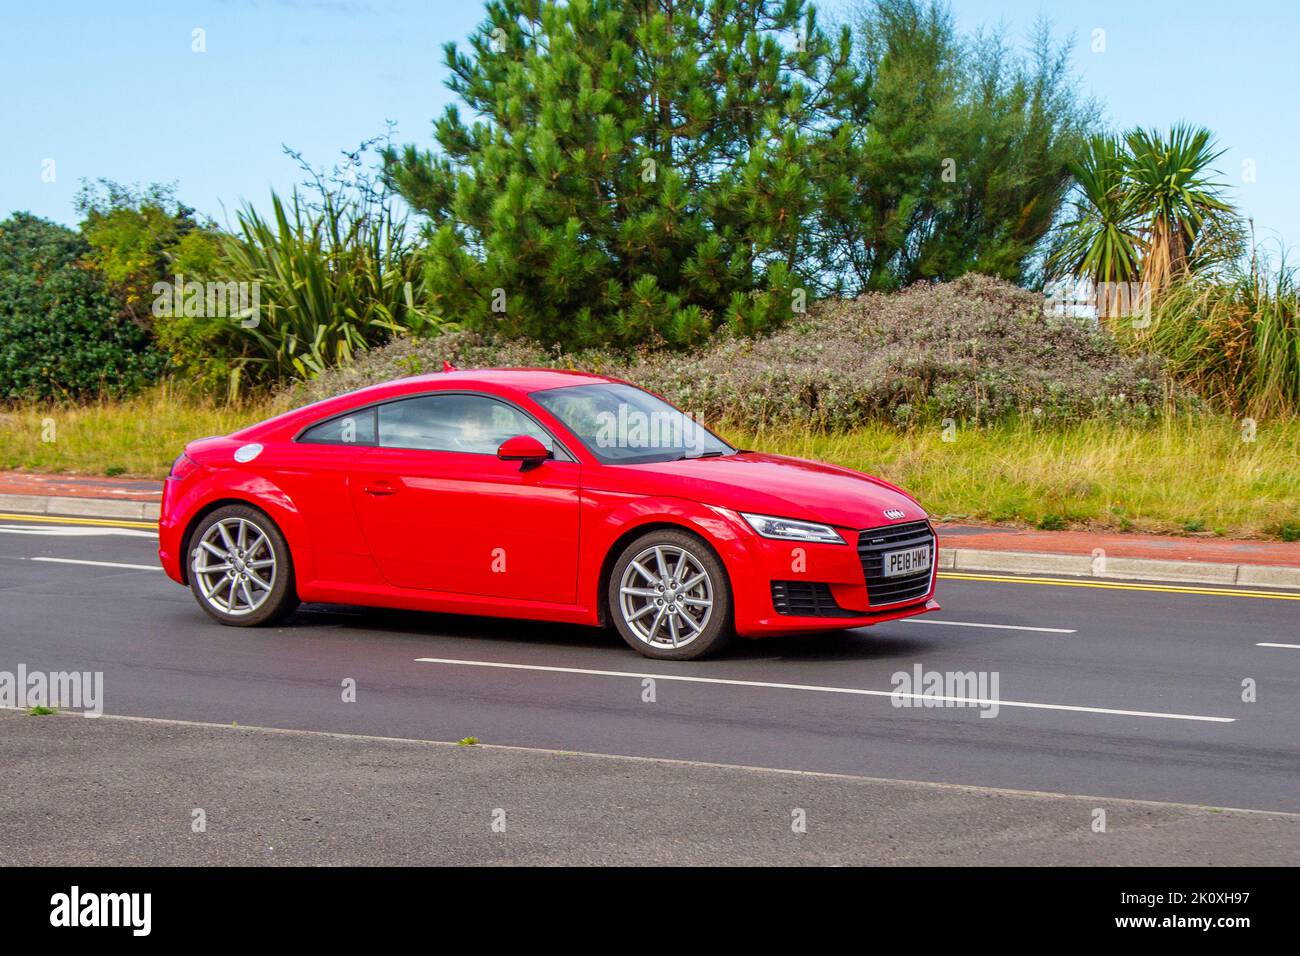 2018 Red AUDI TT TDI QUATTRO S LINE BLACK EDITION 1968cc Diesel 6 speed Semi-automatic; at the Southport Classic car and Speed event on the seafront promenade. UK Stock Photo